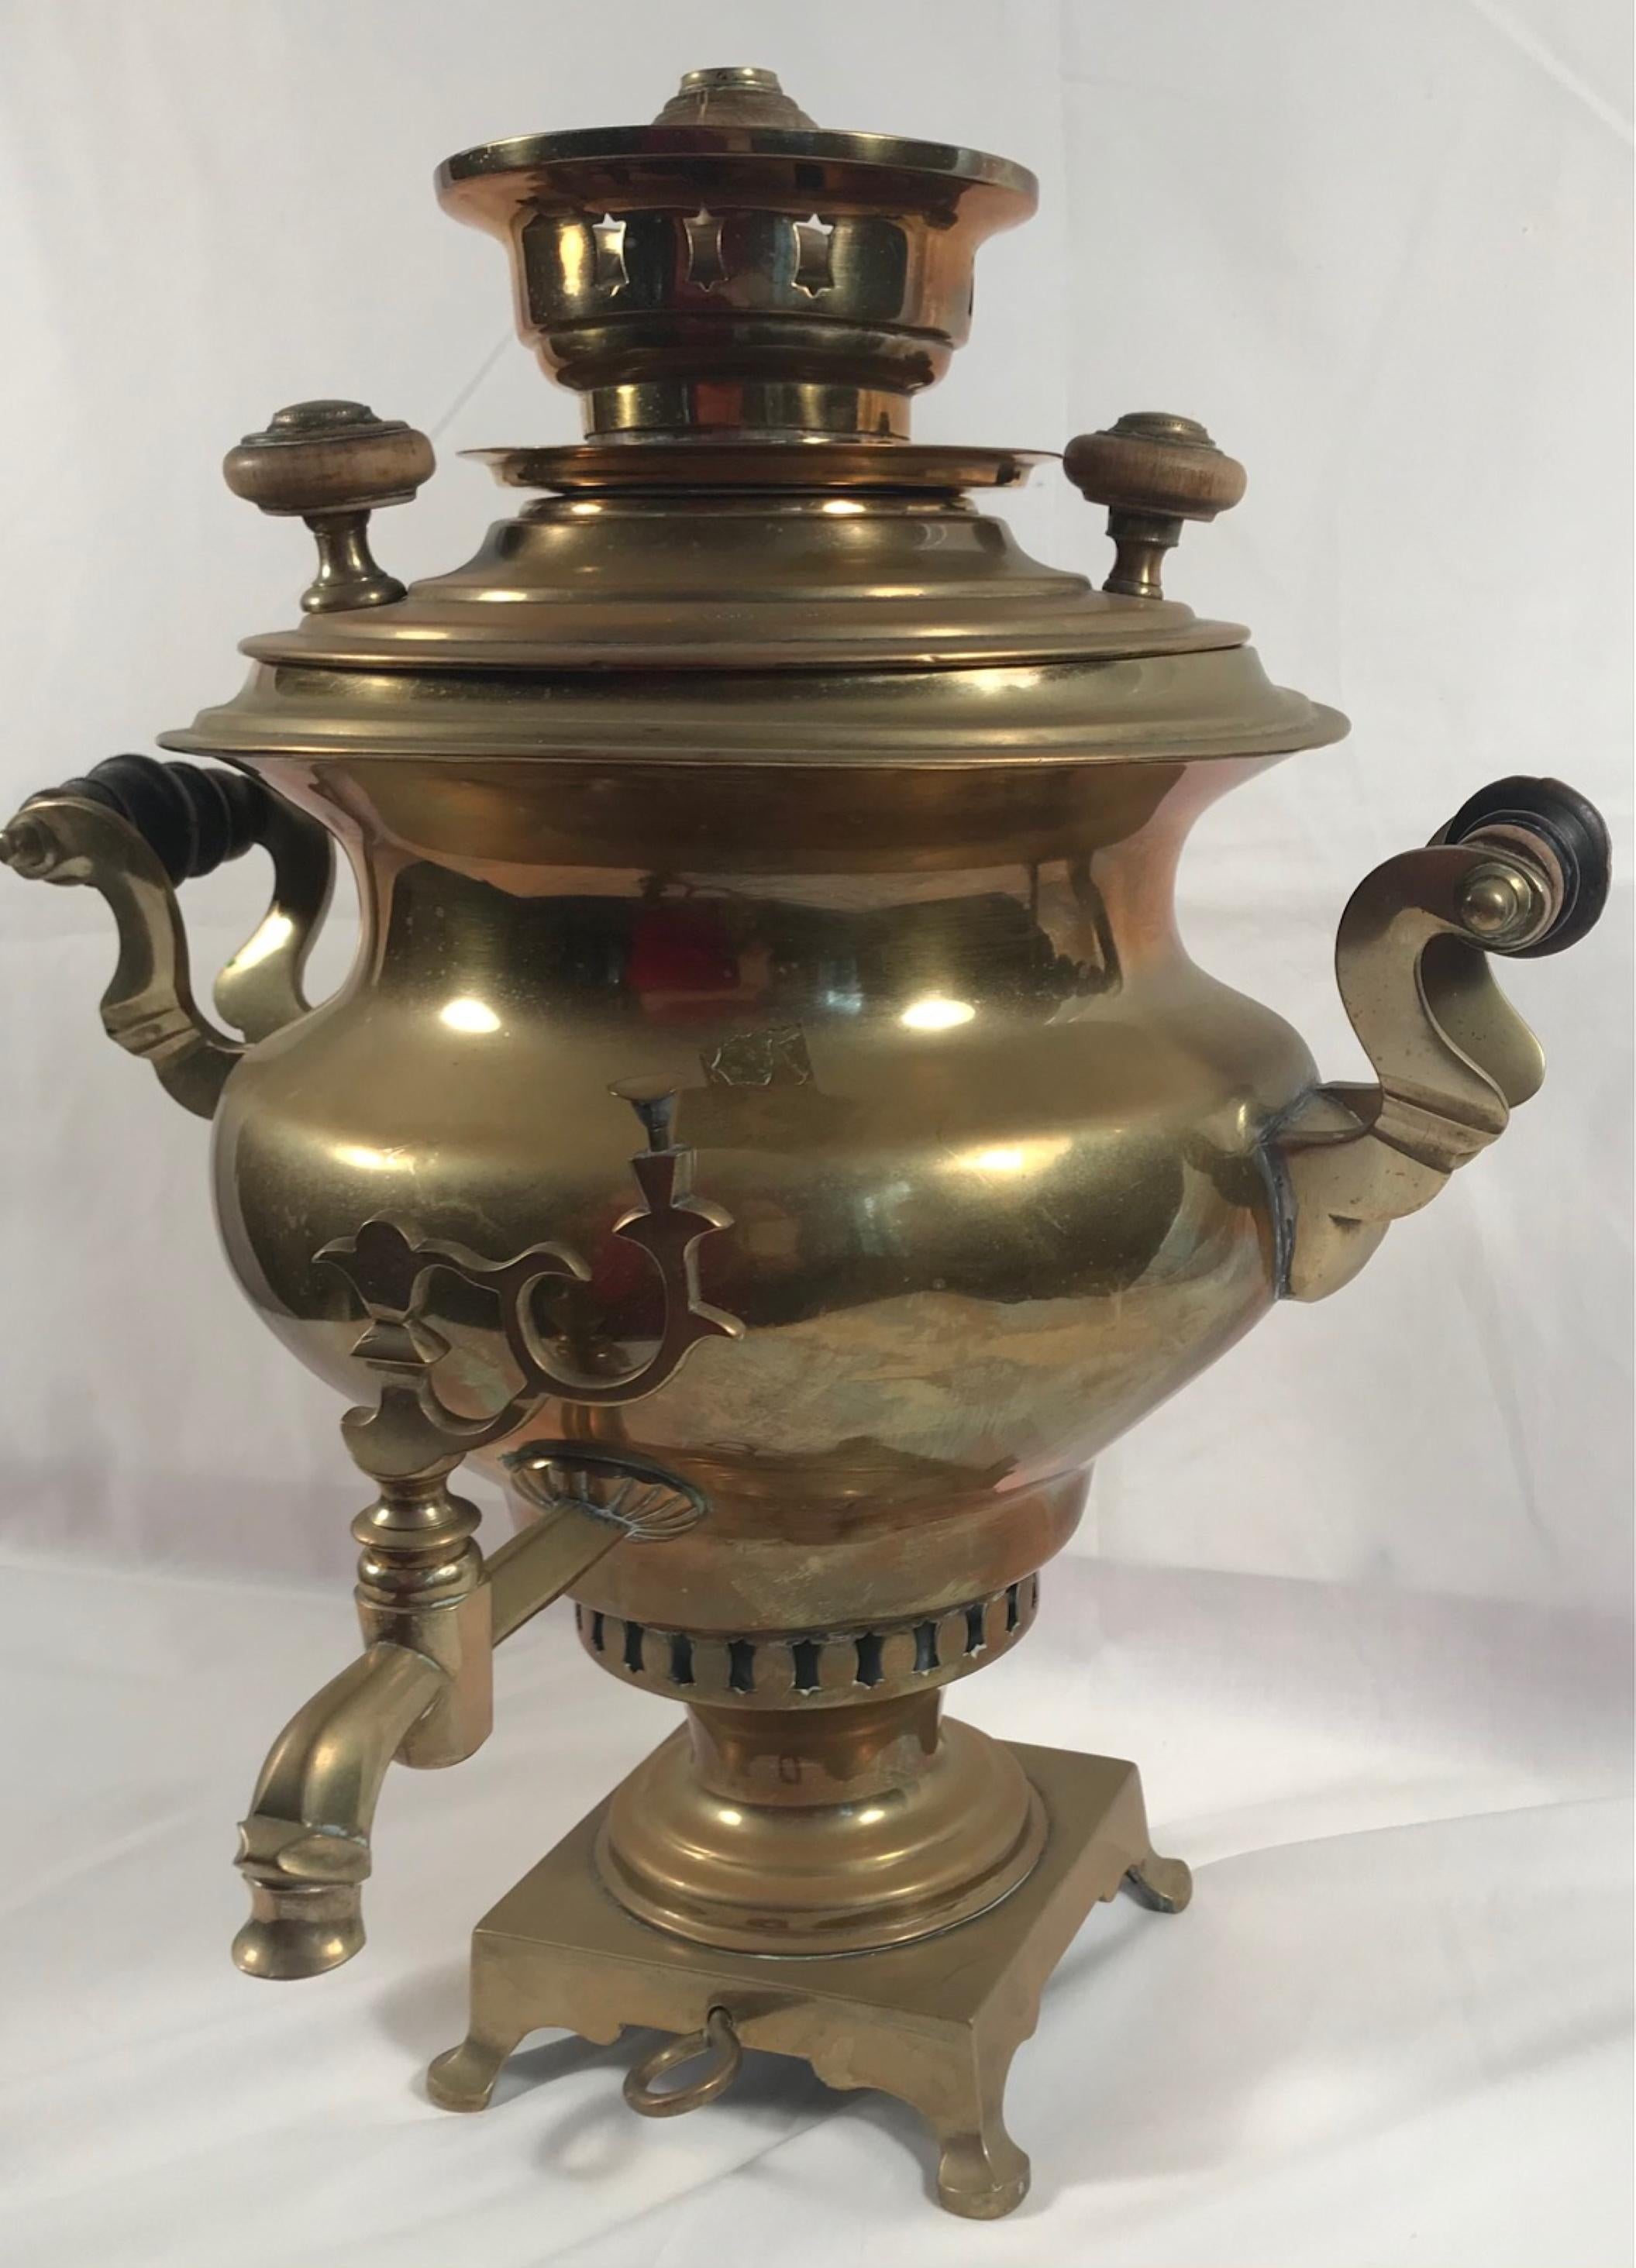 Decorative antique Imperial Russian Samovar, late 19th century

Beautiful 17 inch inverted pyriform shaped antique brass Samovar with decorated S-scrolled handle pieces. This samovar is set atop a square, footed base with pad feet. Makers marks on